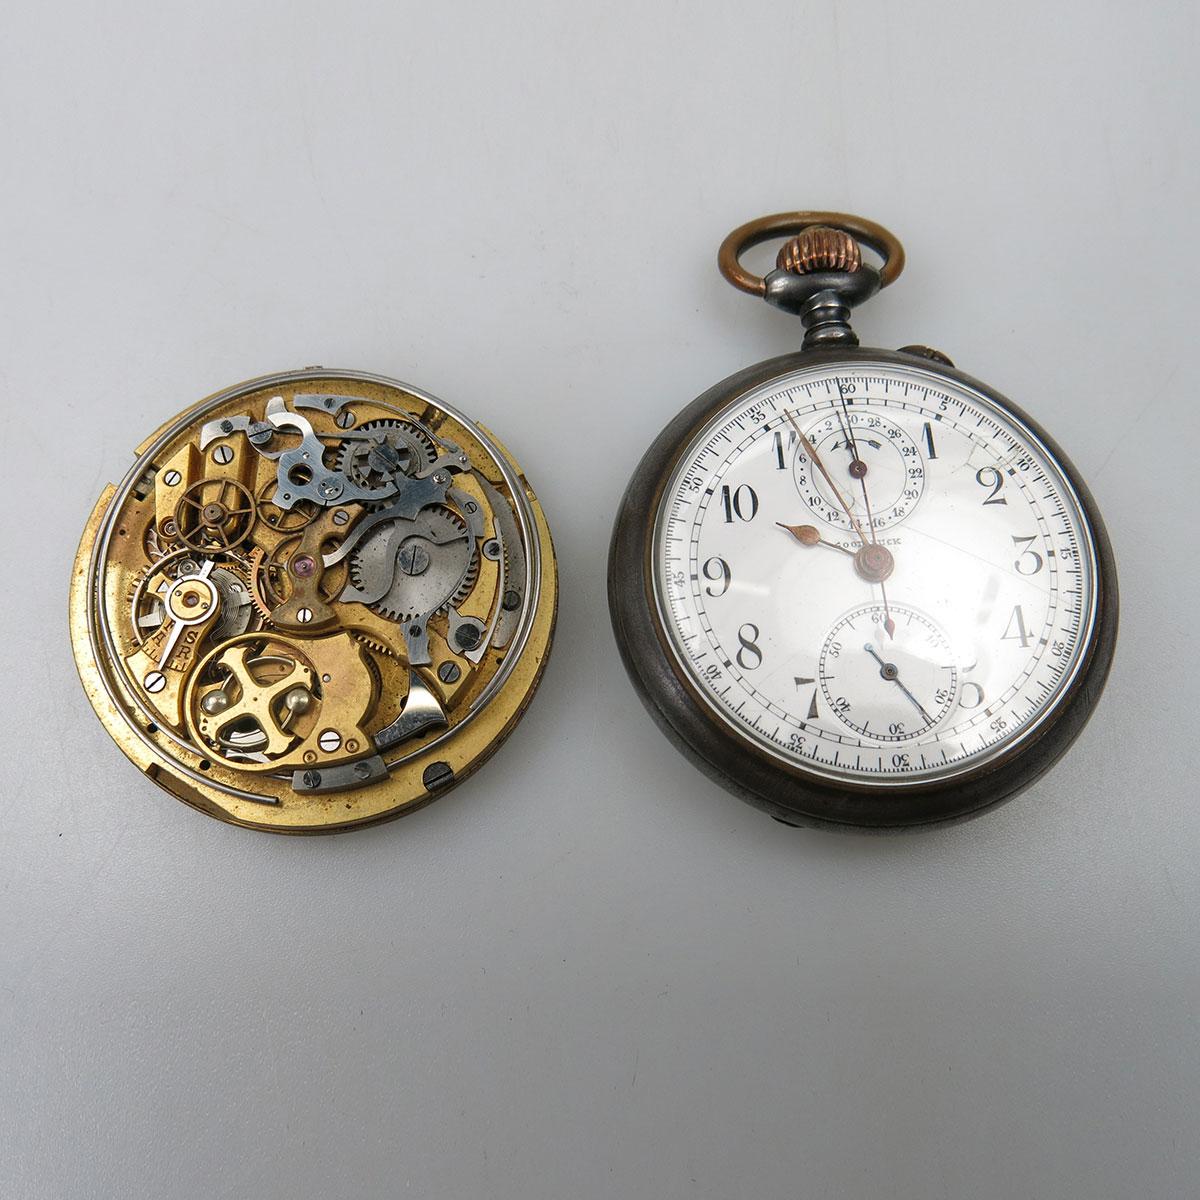 Openface Pocket Watch With Chronograph